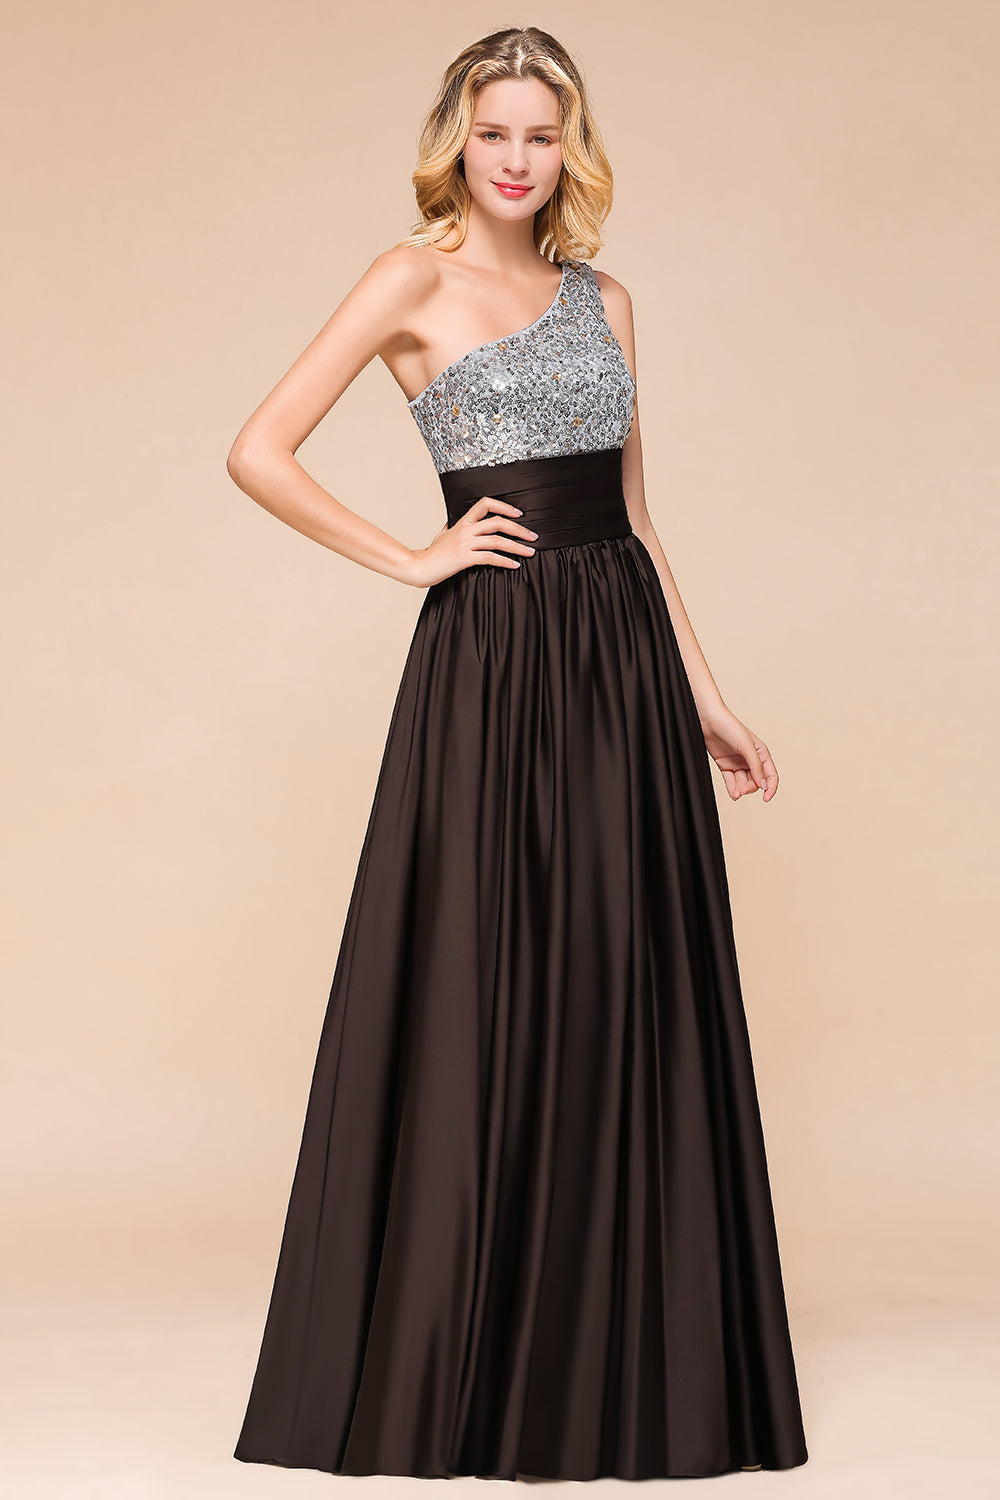 Affordable One Shoulder Sequins Long Bridesmaid Dresses with Ruffle